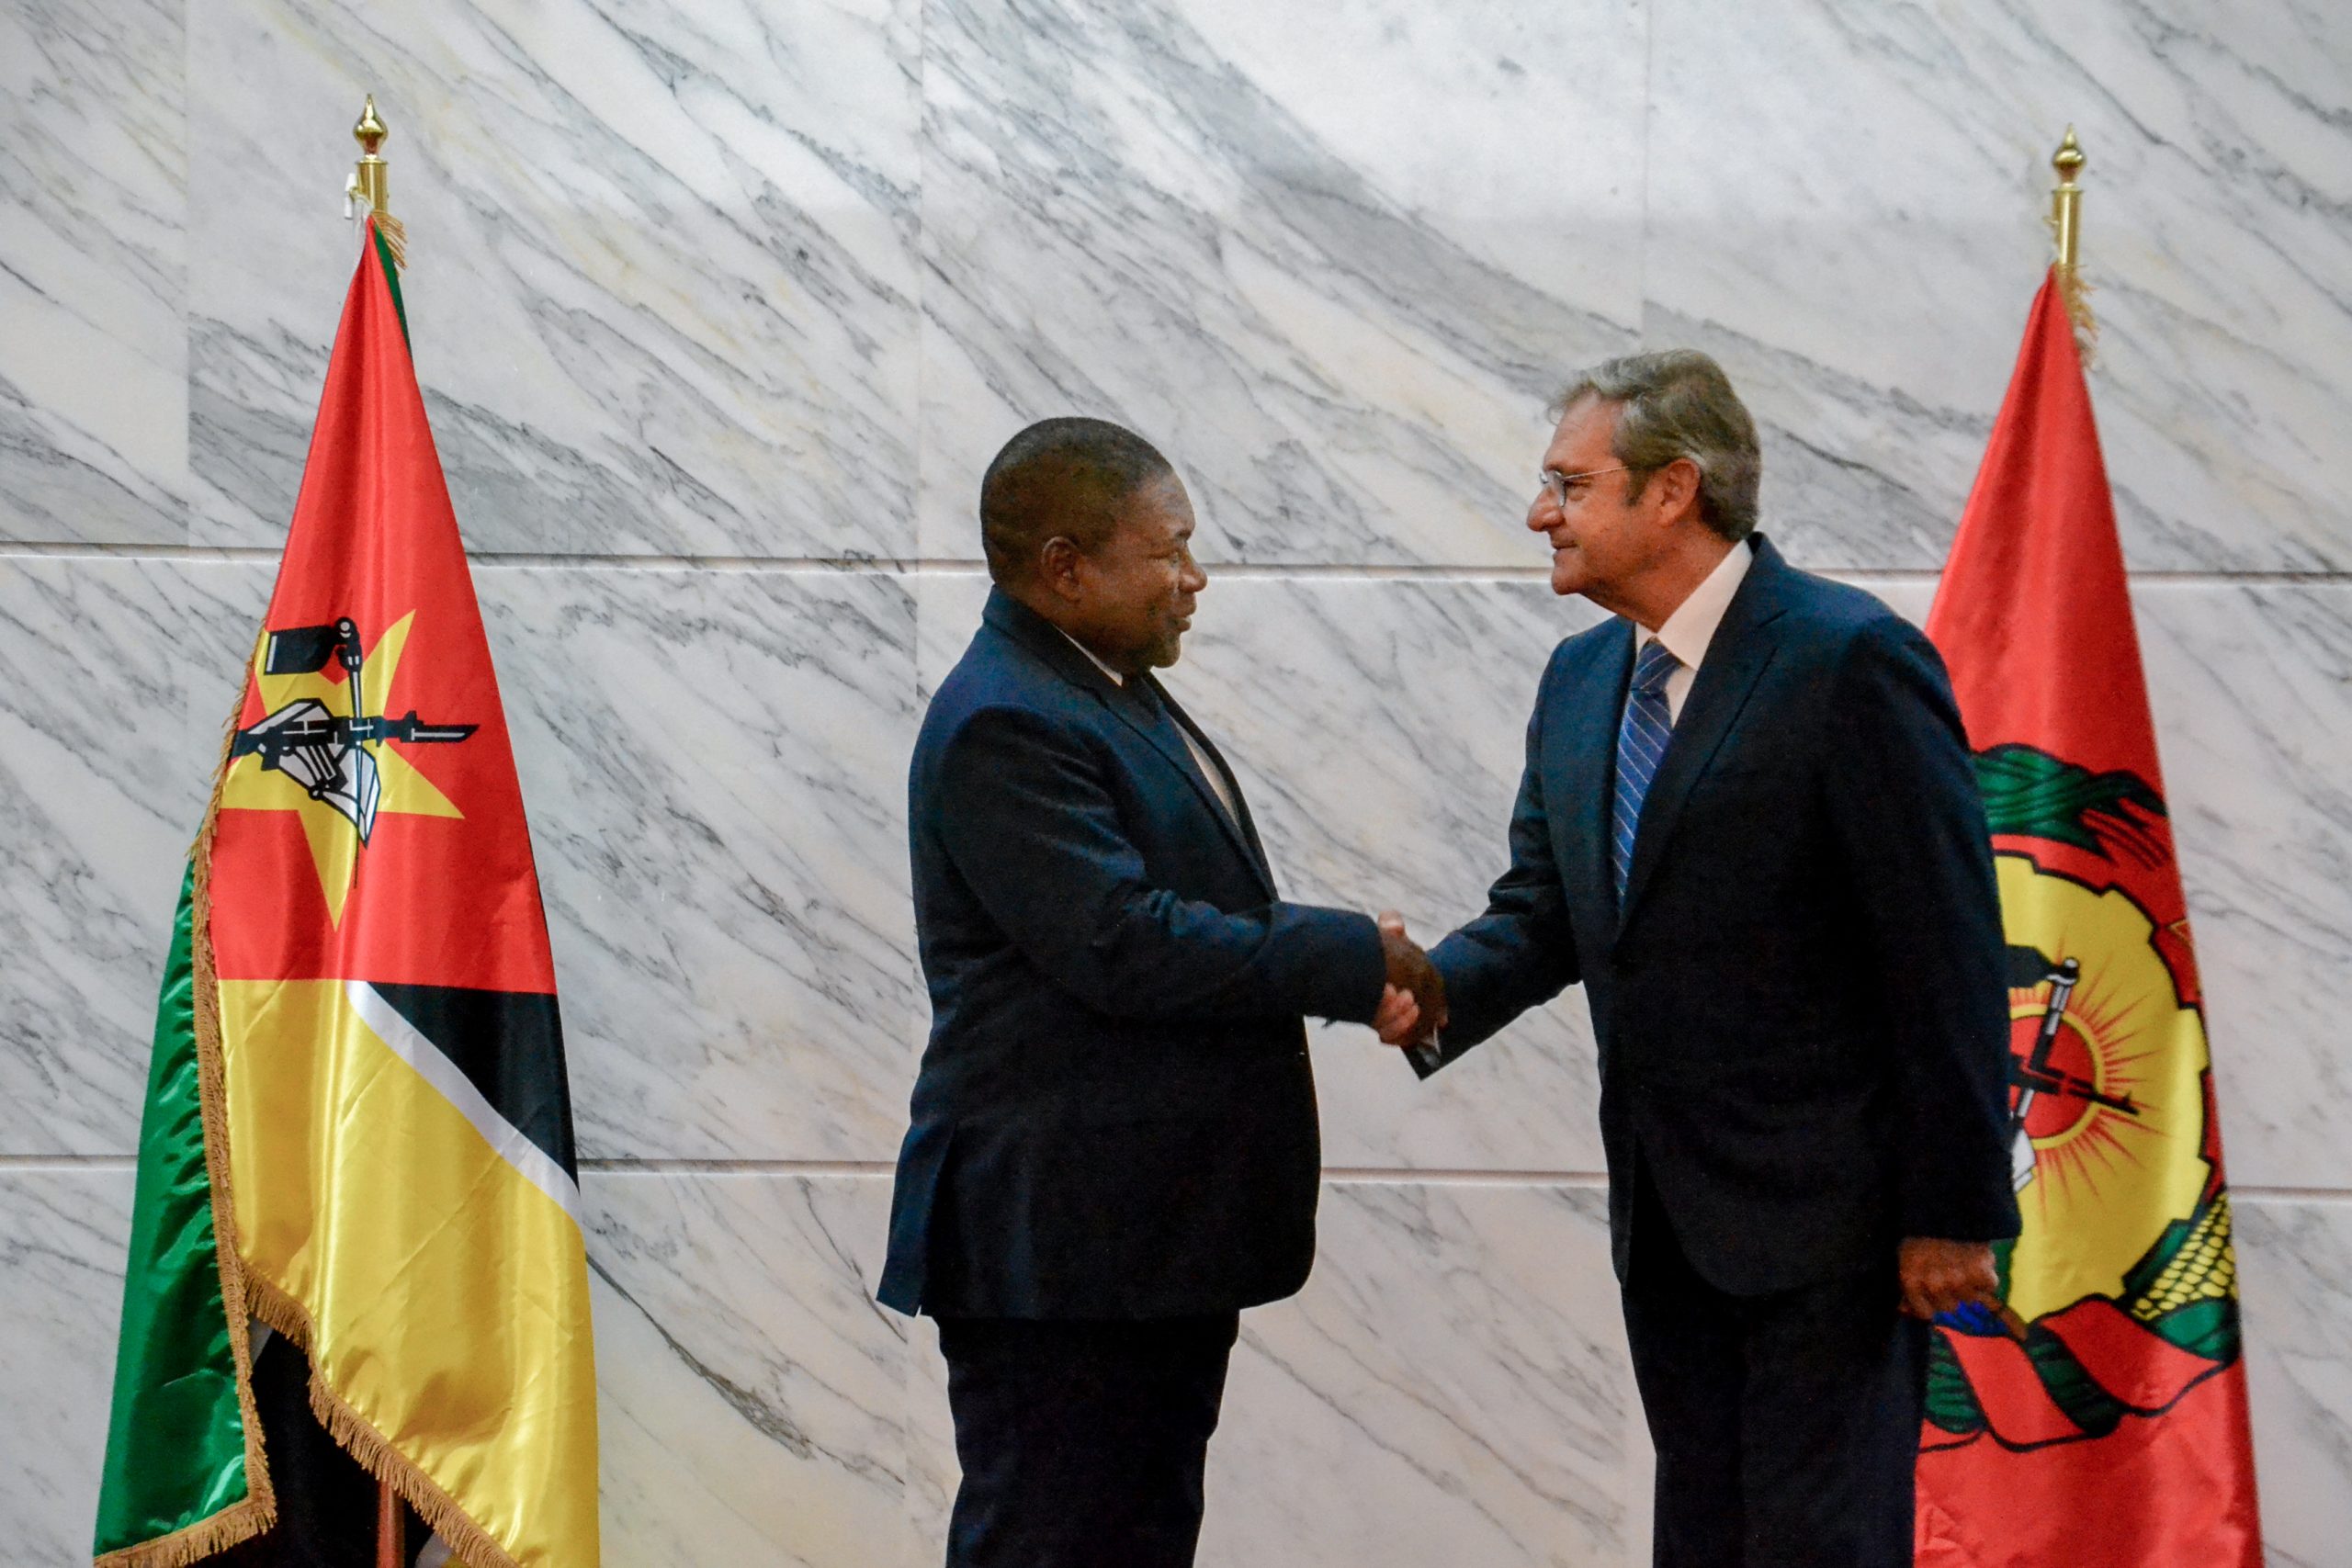 The new Ambassador of the Order of Malta presents his letters of credence to the President of the Republic of Mozambique